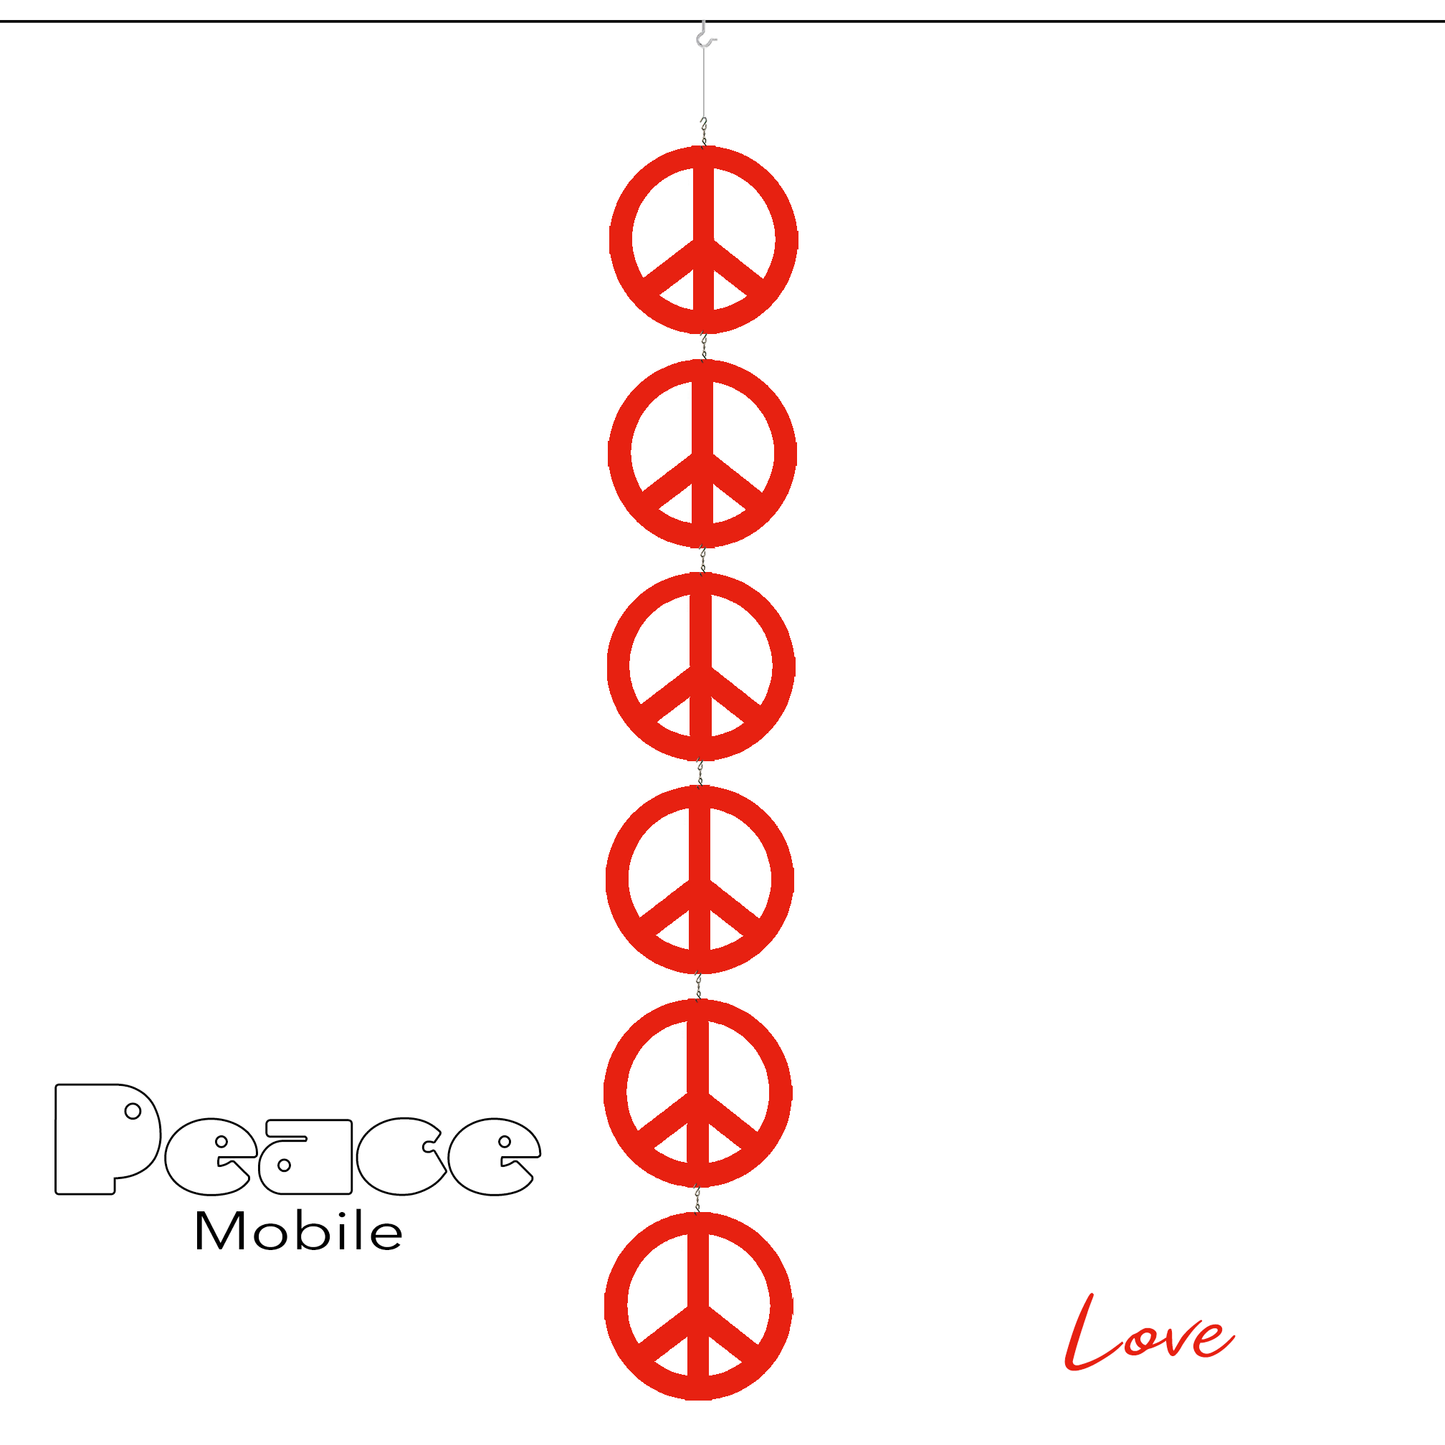 Love Peace Mobile - 6 Peace signs in red - kinetic hanging art mobile symbolizes World Peace - by AtomicMobiles.com